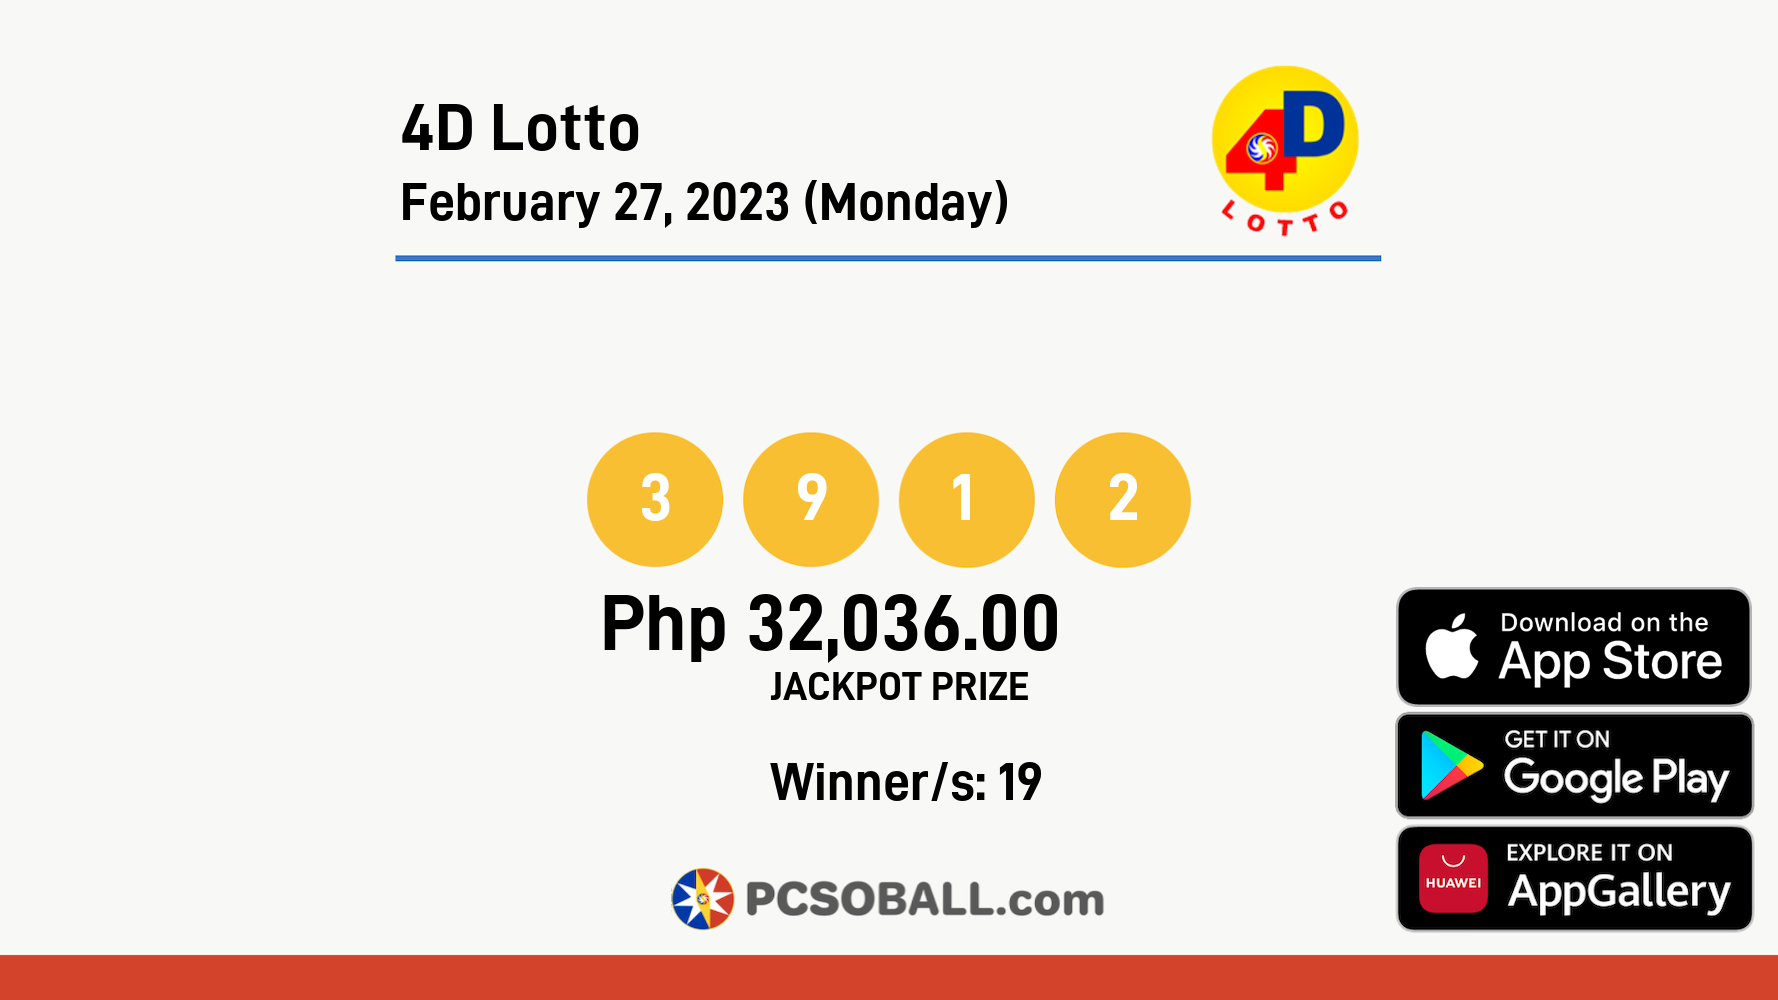 4D Lotto February 27, 2023 (Monday) Result